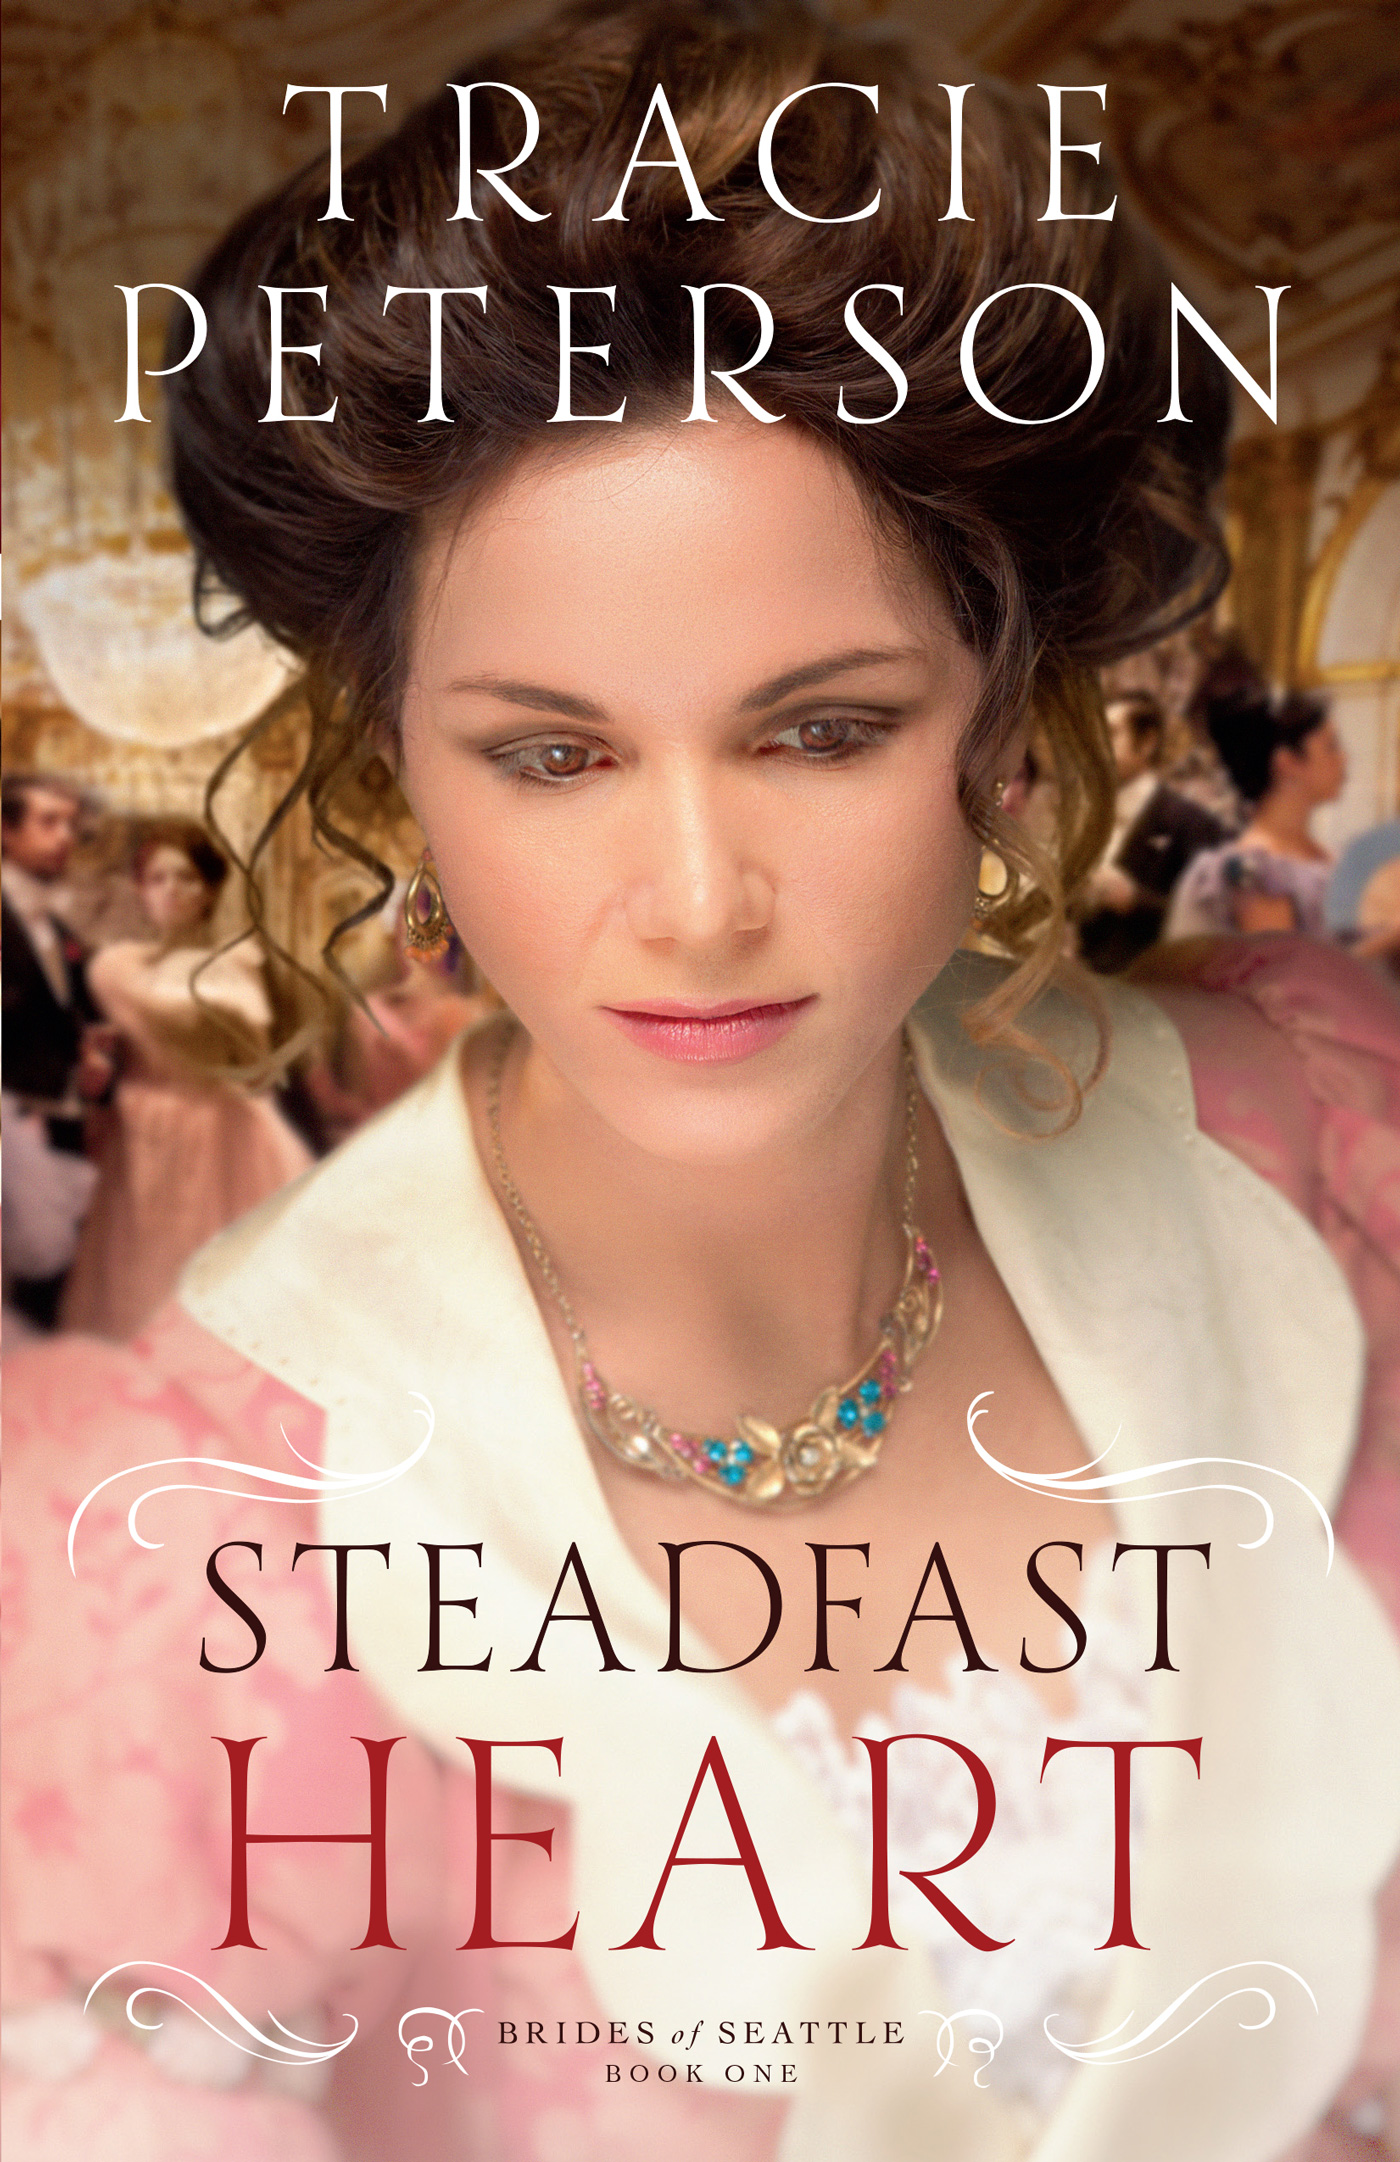 Steadfast Heart (2014) by Tracie Peterson